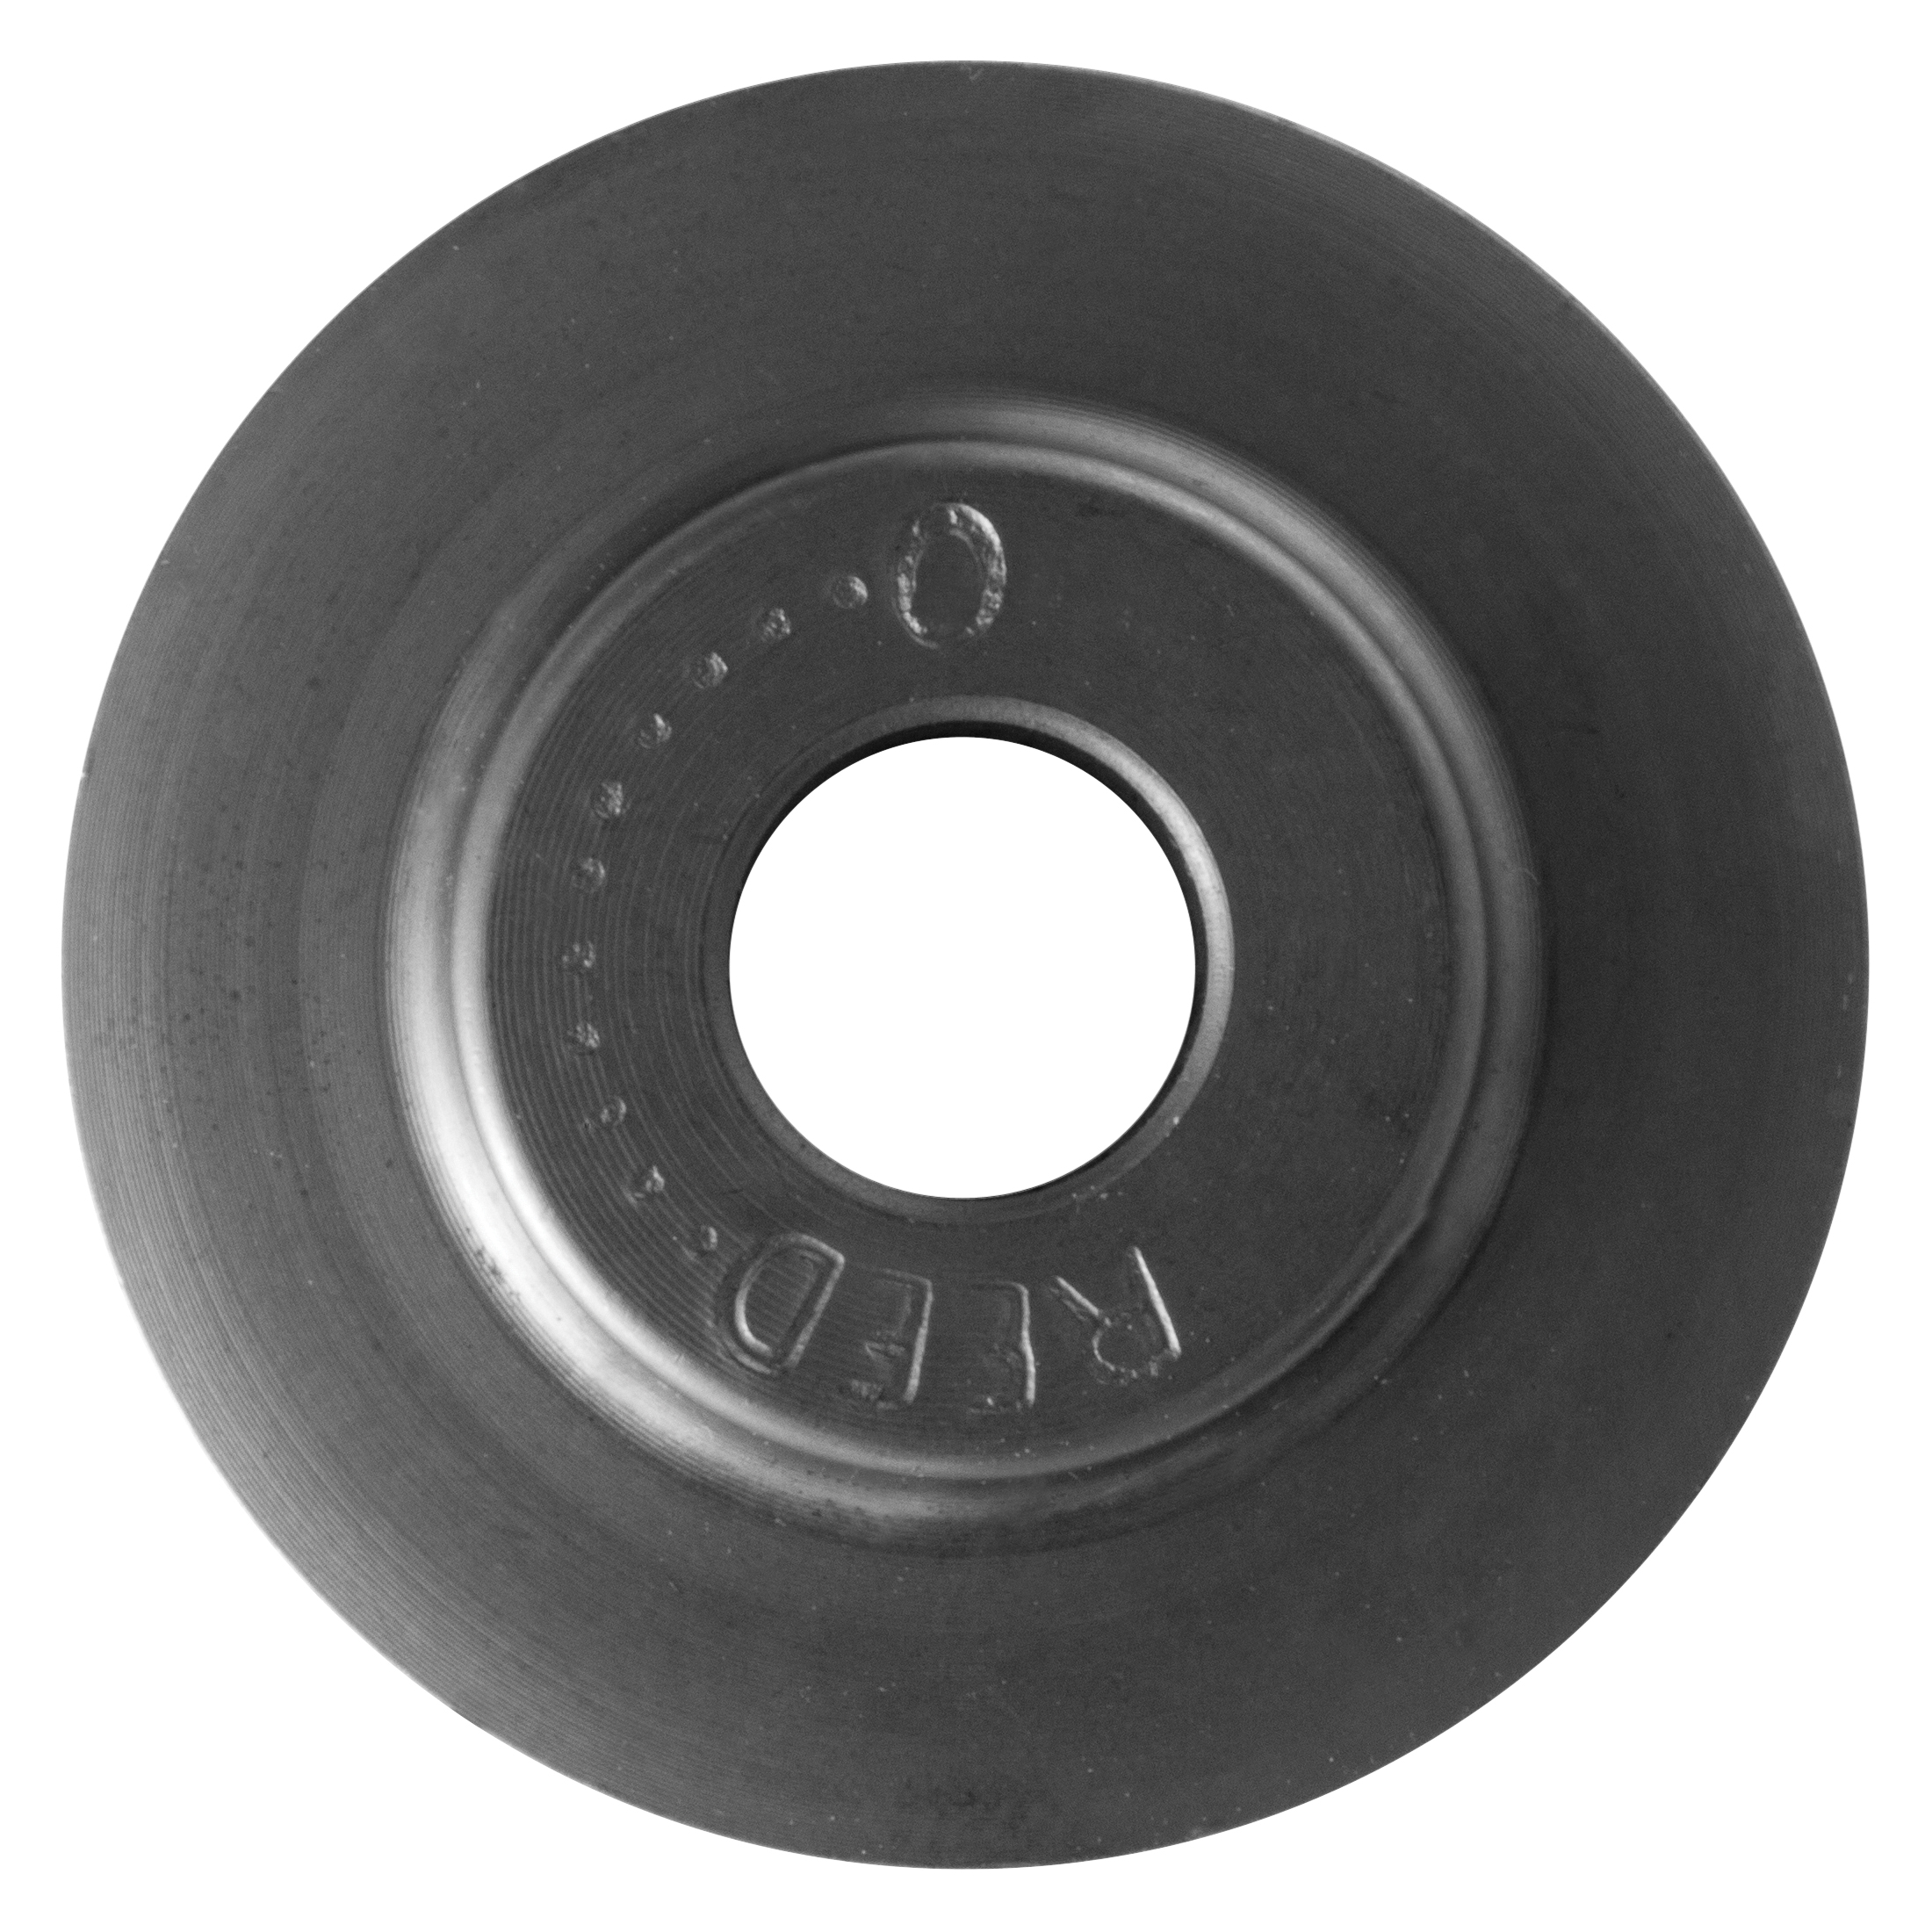 Reed 03660 Replacement Cutter Wheel, 0.18 in Blade Exposure, For Use With TC1Q, TC1.6Q, TC2Q, T10, T15, T20, RT15T1, RT15T2, RT15T3, RTC1.1, RTC1.4 Metal Tubing Cutters and Wheeler Rex® 9290, 9291 Pipe Cutter